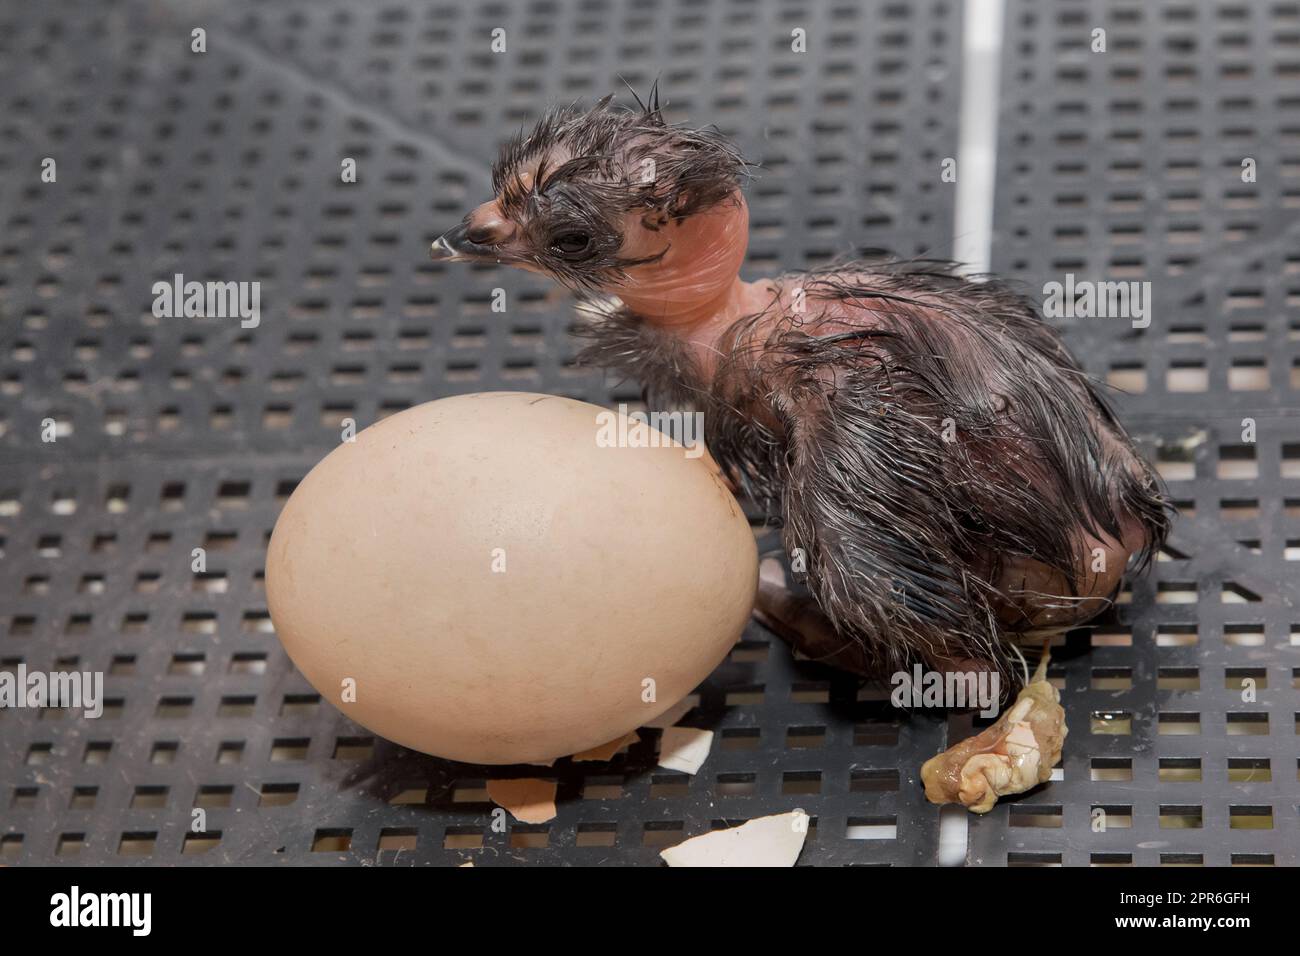 Duck Incubator Her Eggs on the Straw Nest. Stock Image - Image of cover,  farming: 44863585